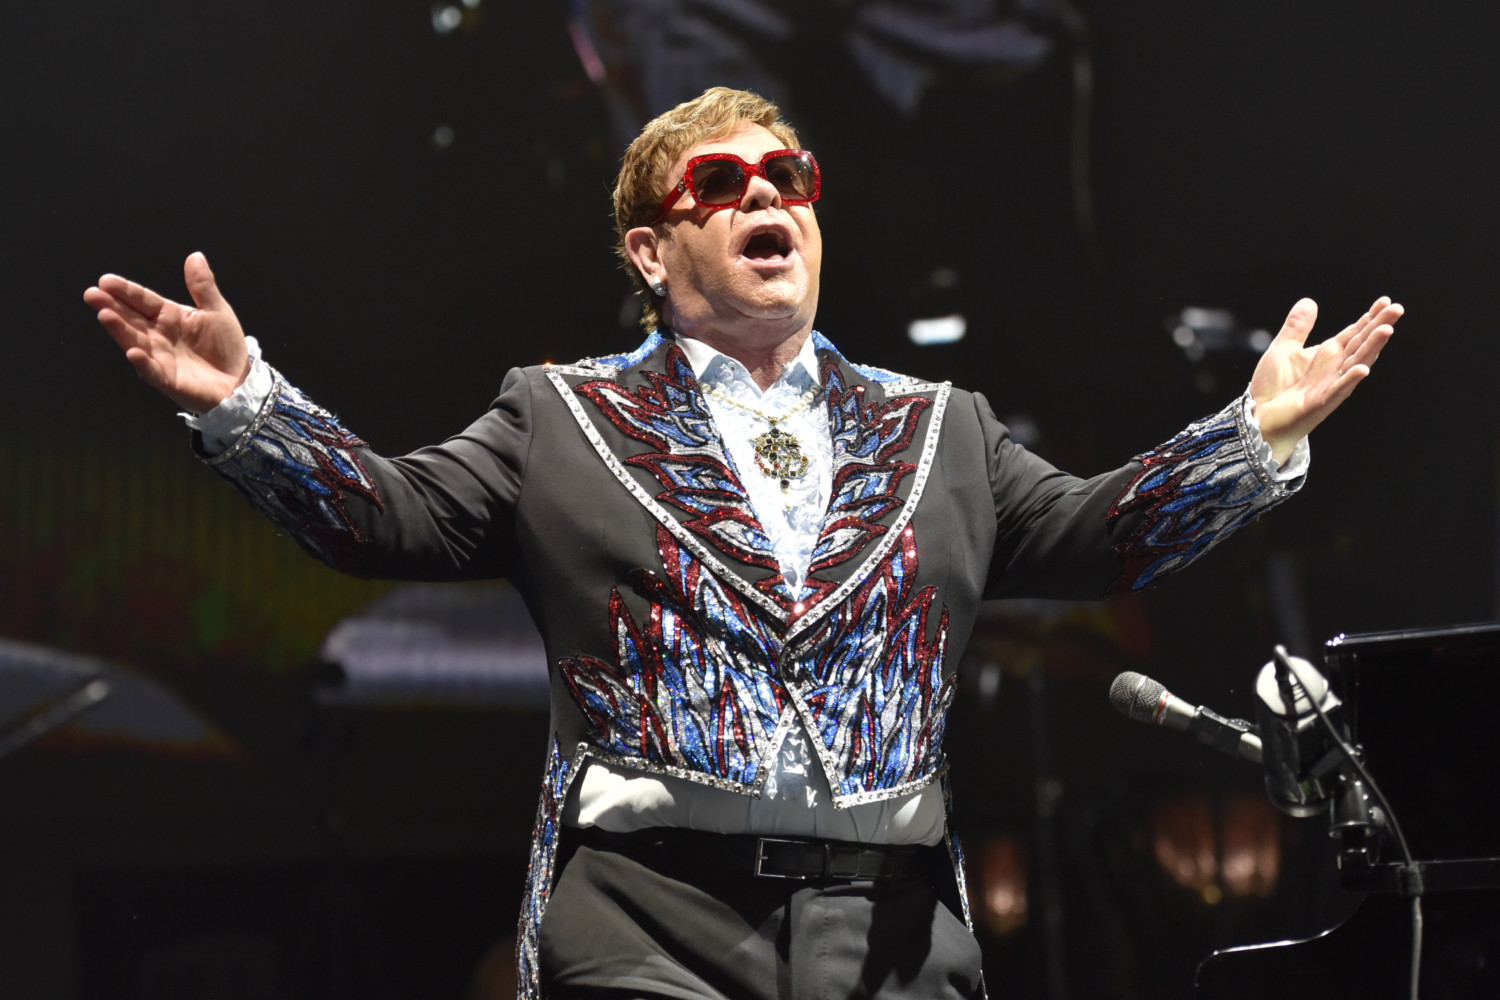 Elton John Farewell Tour Dates Have Been Announced And Tickets Go On Sale Soon